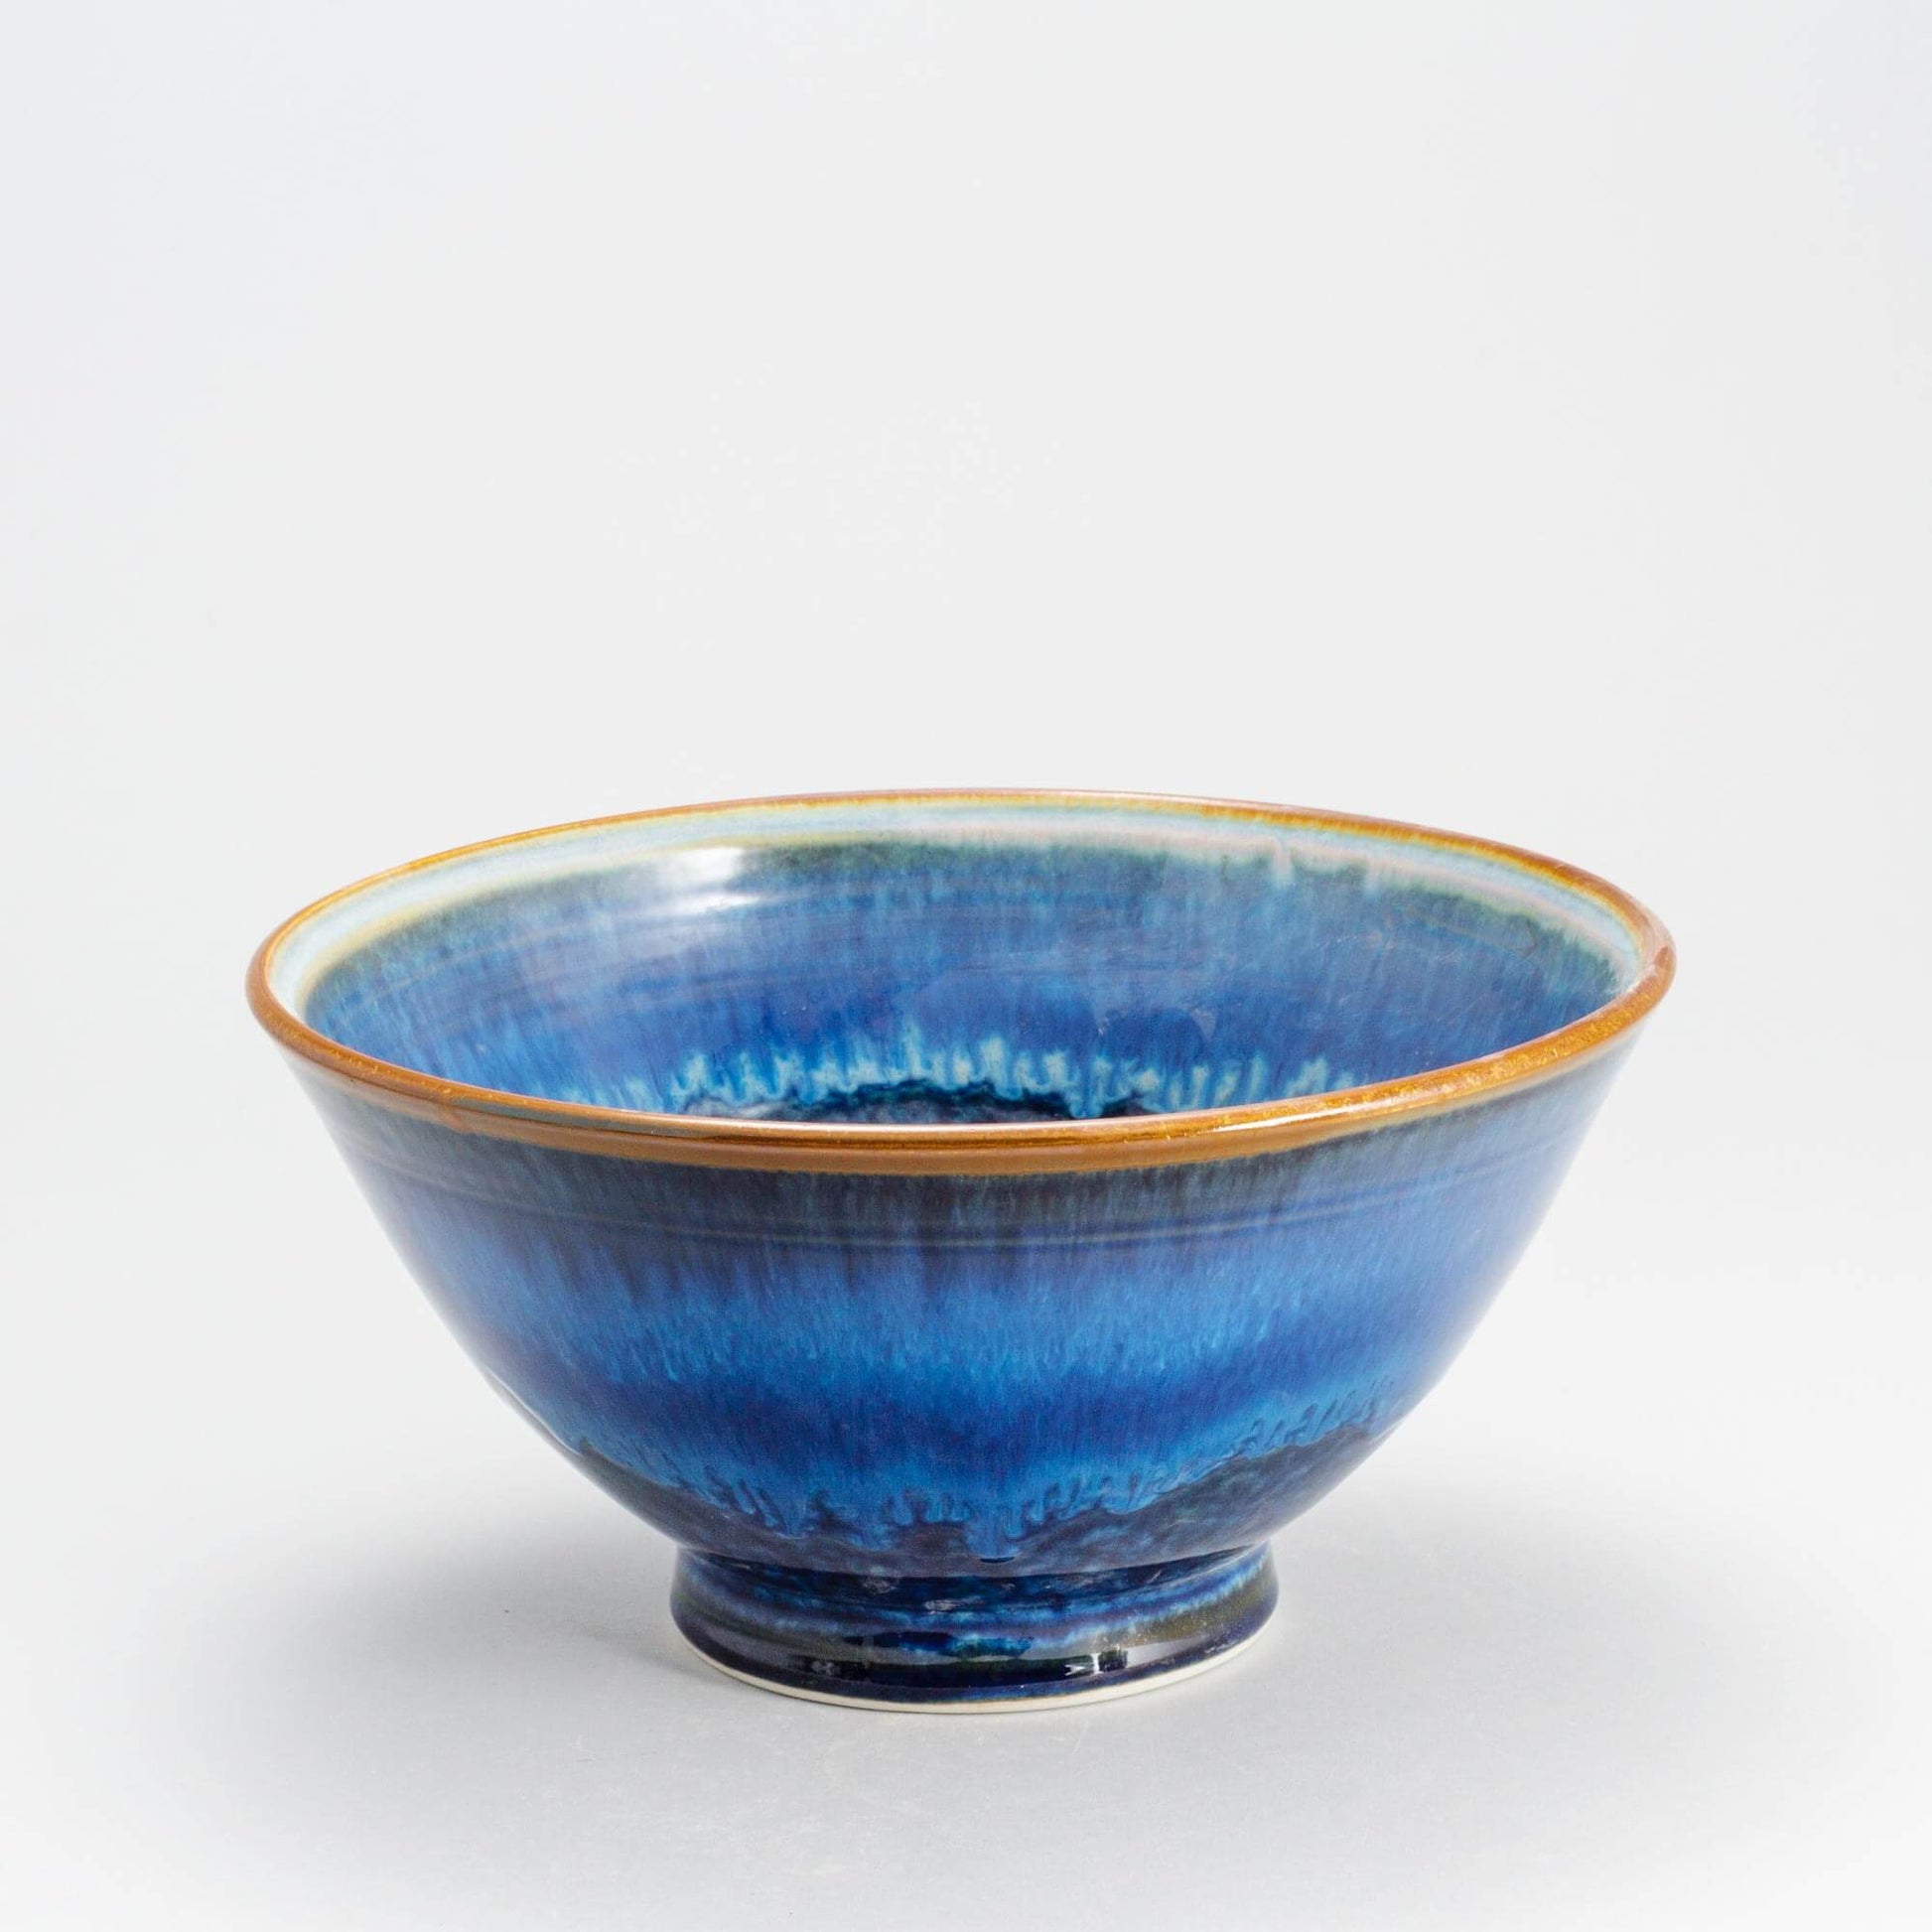 Handmade Pottery Popcorn Bowl in Cobalt pattern made by Georgetown Pottery in Maine